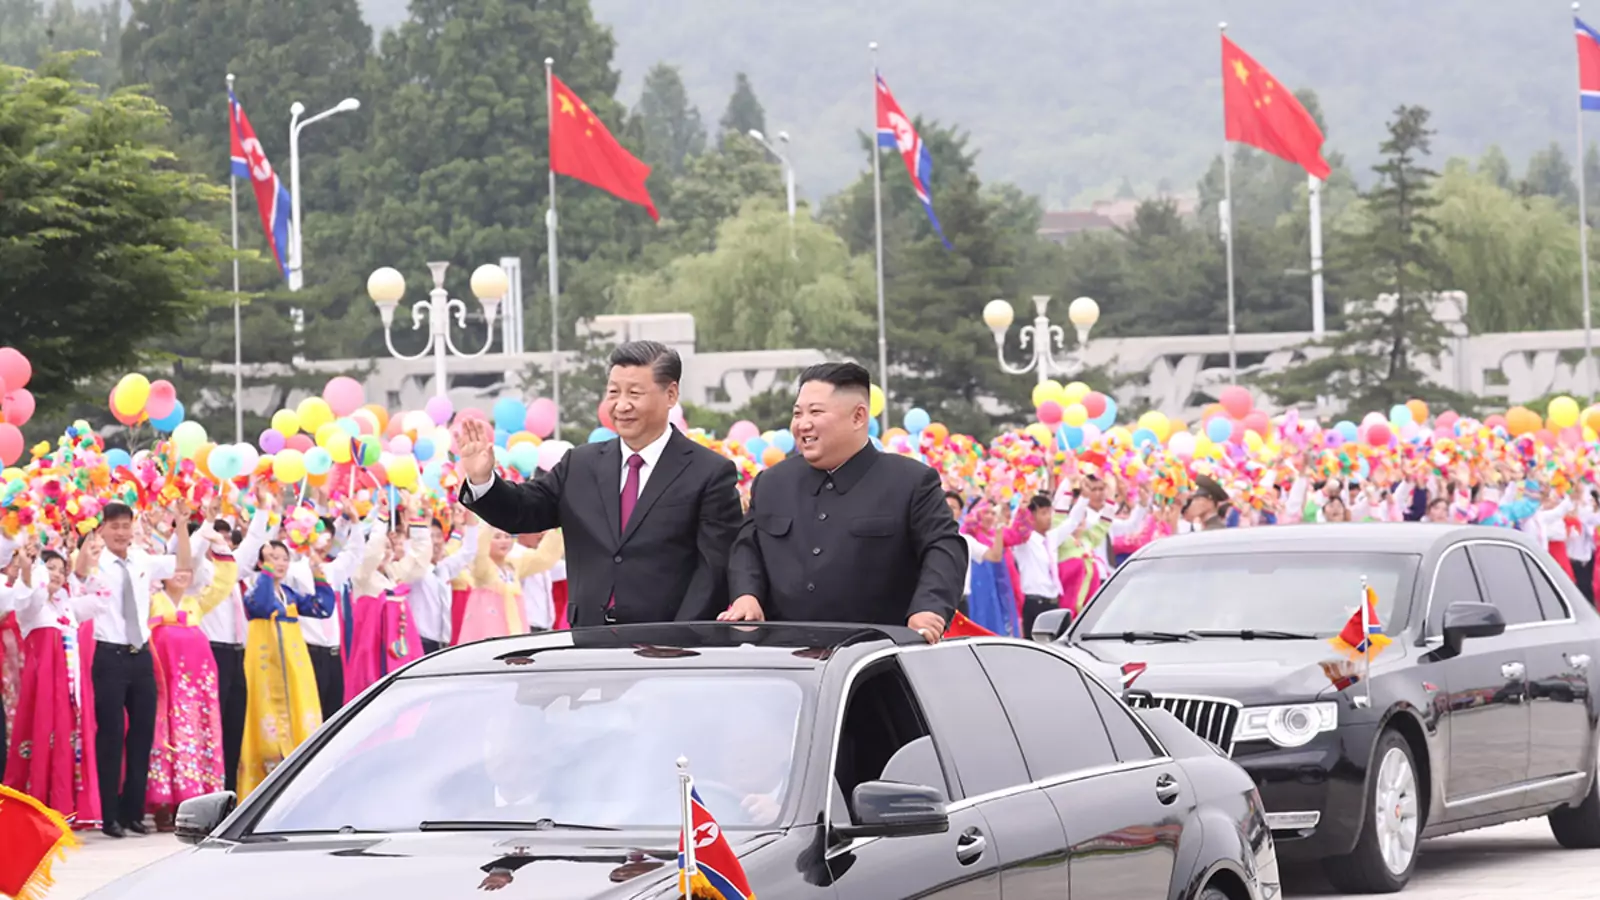 Chinese President Xi Jinping and North Korean leader Kim Jong-un wave to crowds in Pyongyang.